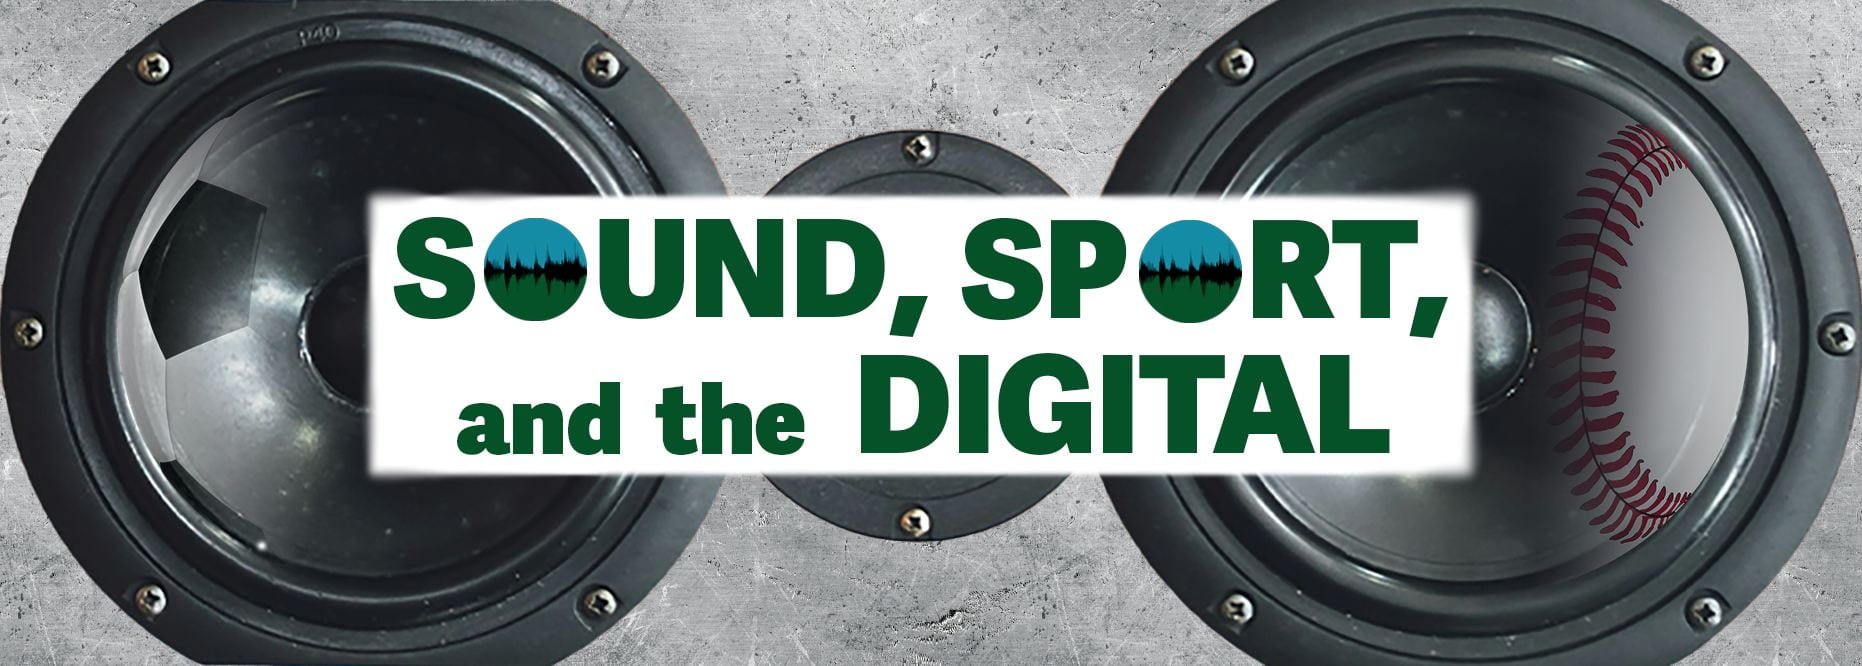 The words "Sound, Sport, and the Digital" appear across speakers with superimposed sports balls.